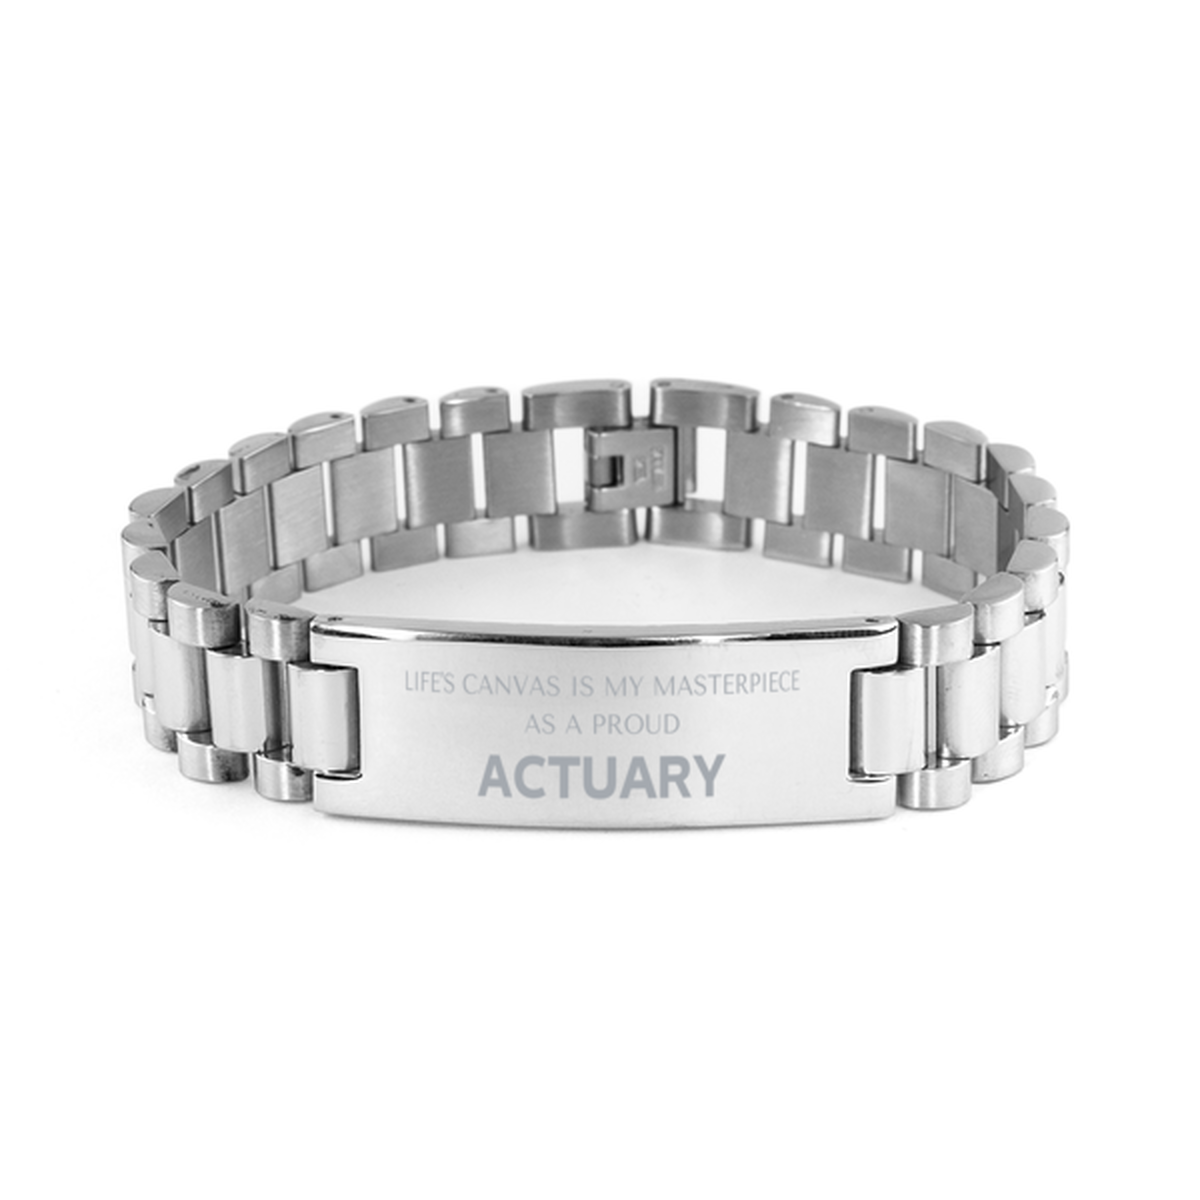 Proud Actuary Gifts, Life's canvas is my masterpiece, Epic Birthday Christmas Unique Ladder Stainless Steel Bracelet For Actuary, Coworkers, Men, Women, Friends